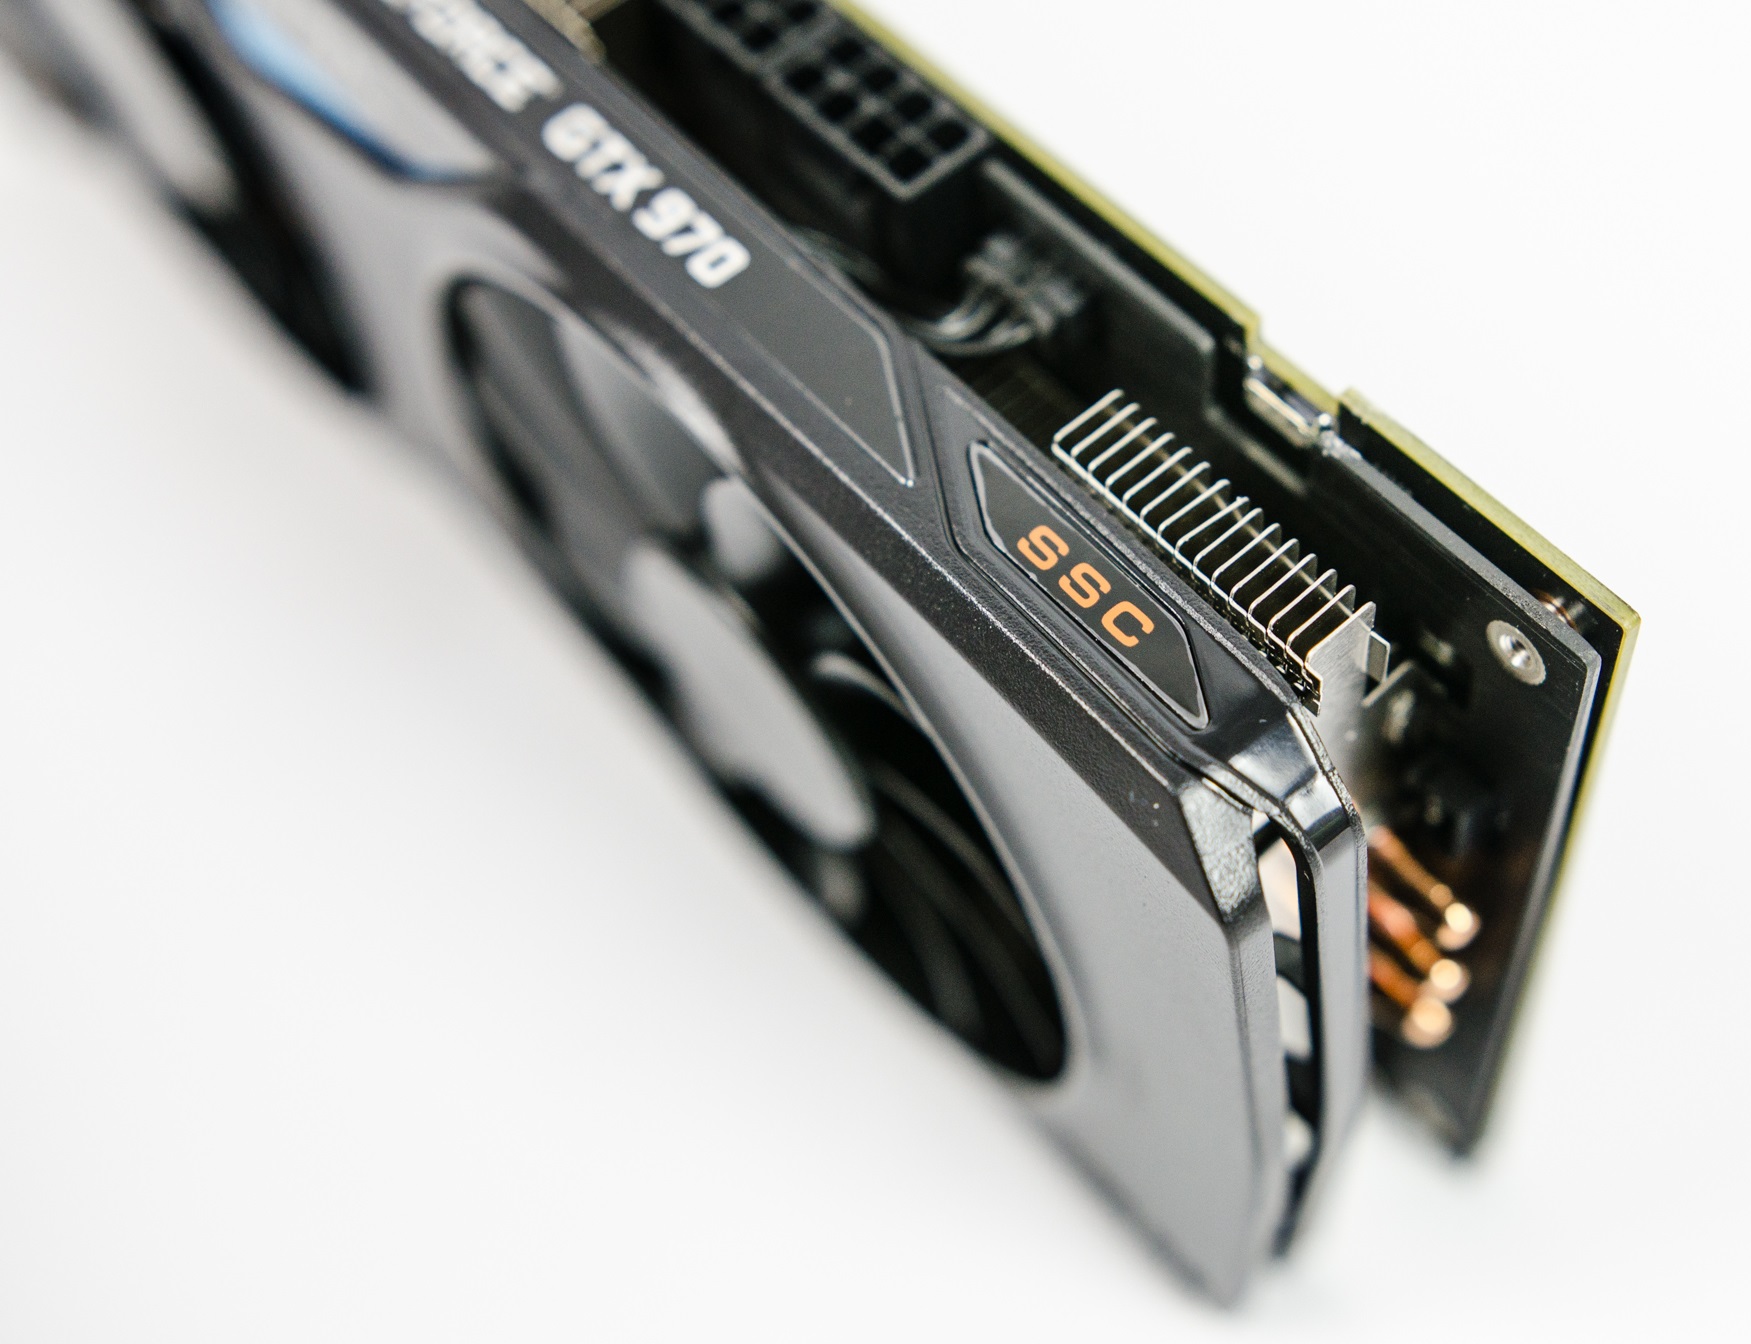 Evga Geforce Gtx 970 Ssc Acx 2 0 Review Page 3 Of Extremerigs Net